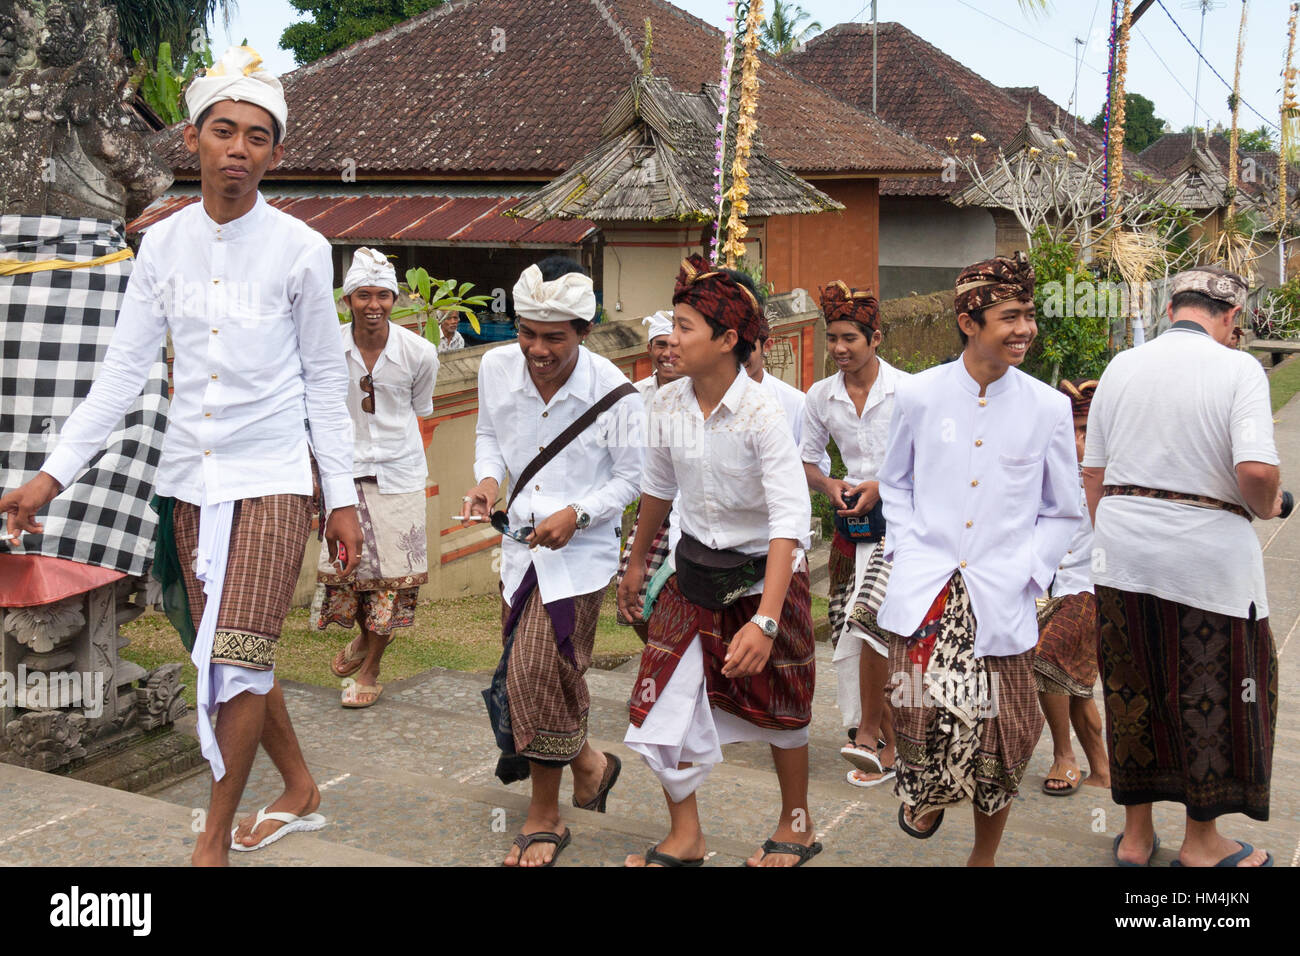 Young boys on their way to the temple during the Galungan festival in Bali, Indonesia Stock Photo